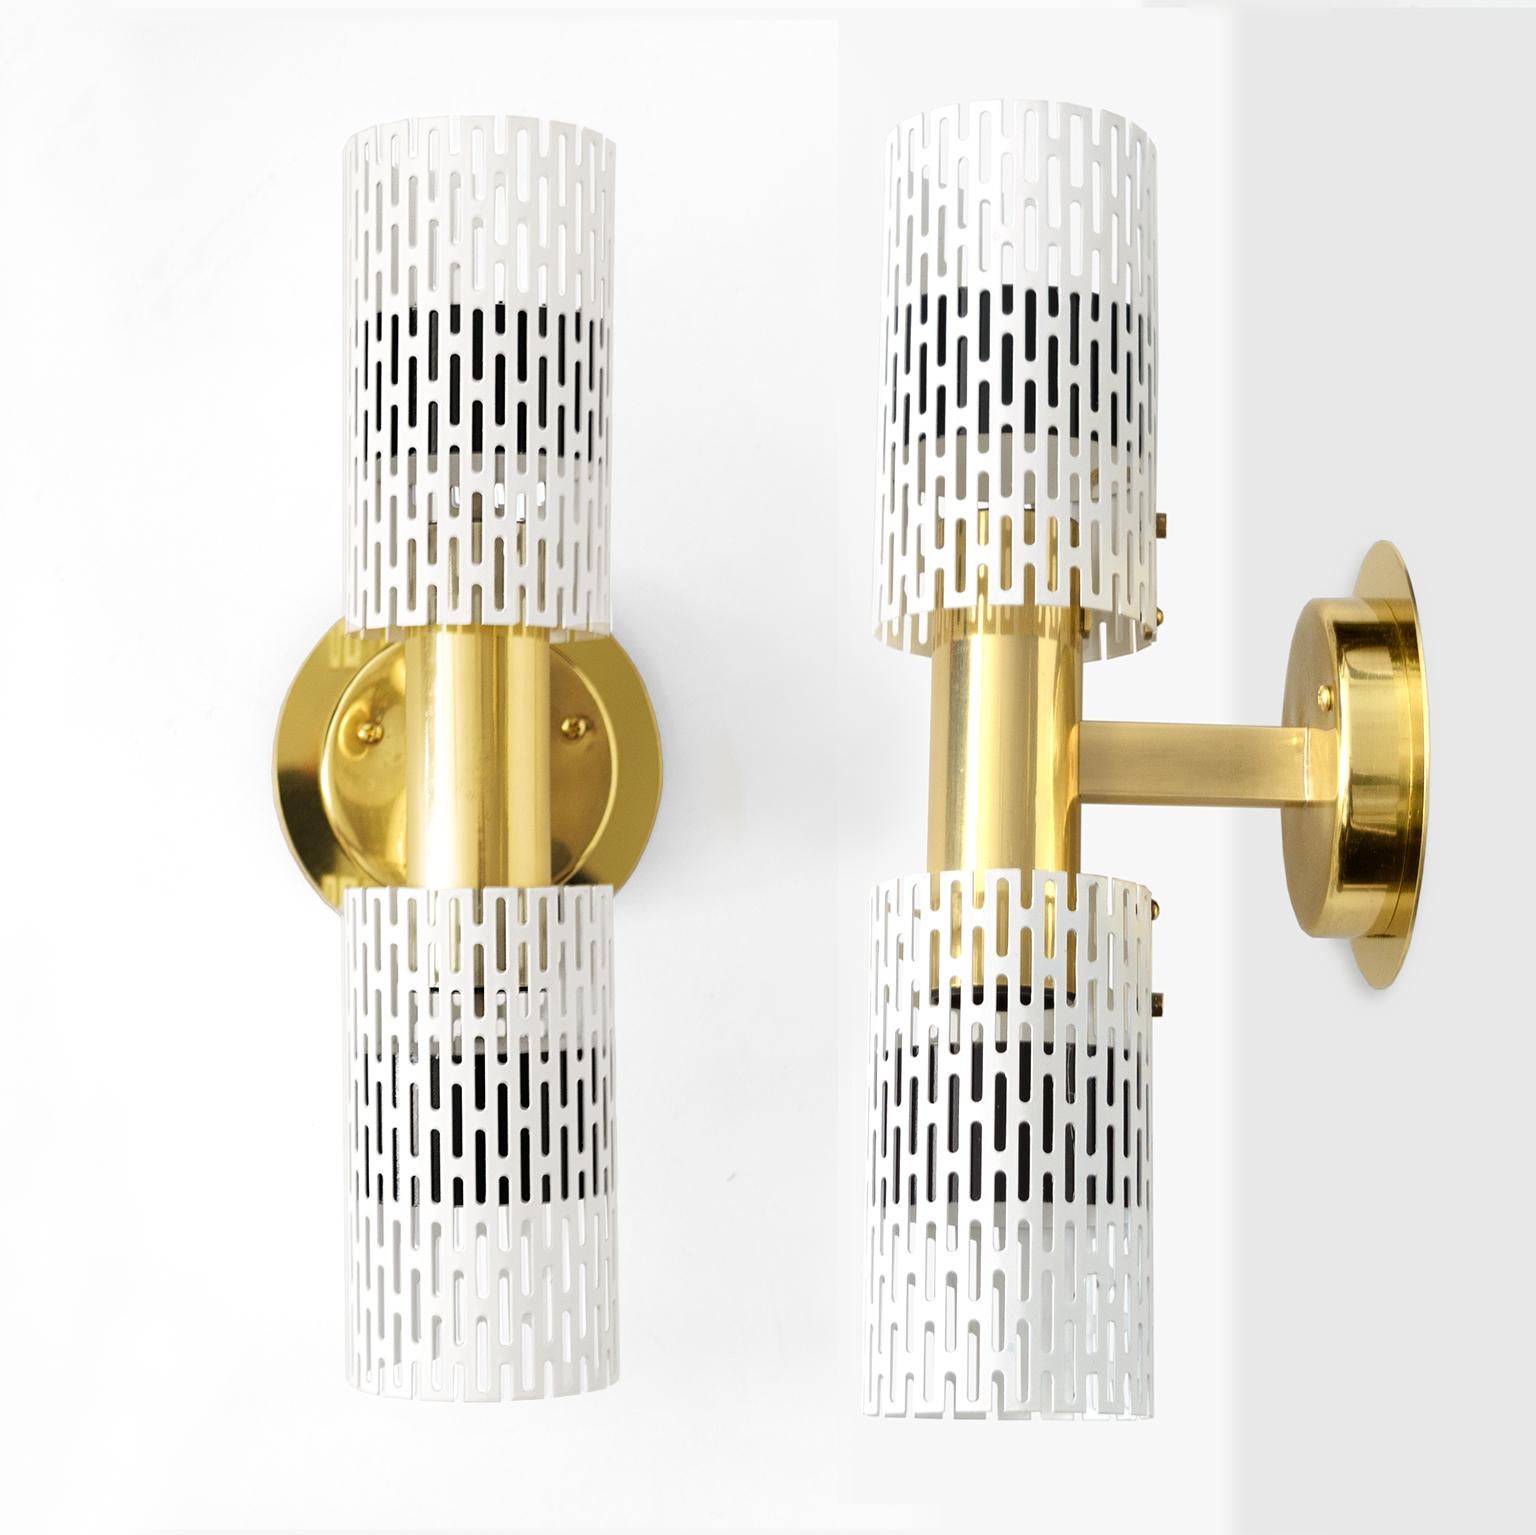 A pair of Harald Notini designed wall sconces with pieced tubular painted metal shades and polished brass frame and backplate. A custom brass element was created to allow easy installation for a standard American ‘J-box”. The sconces have been